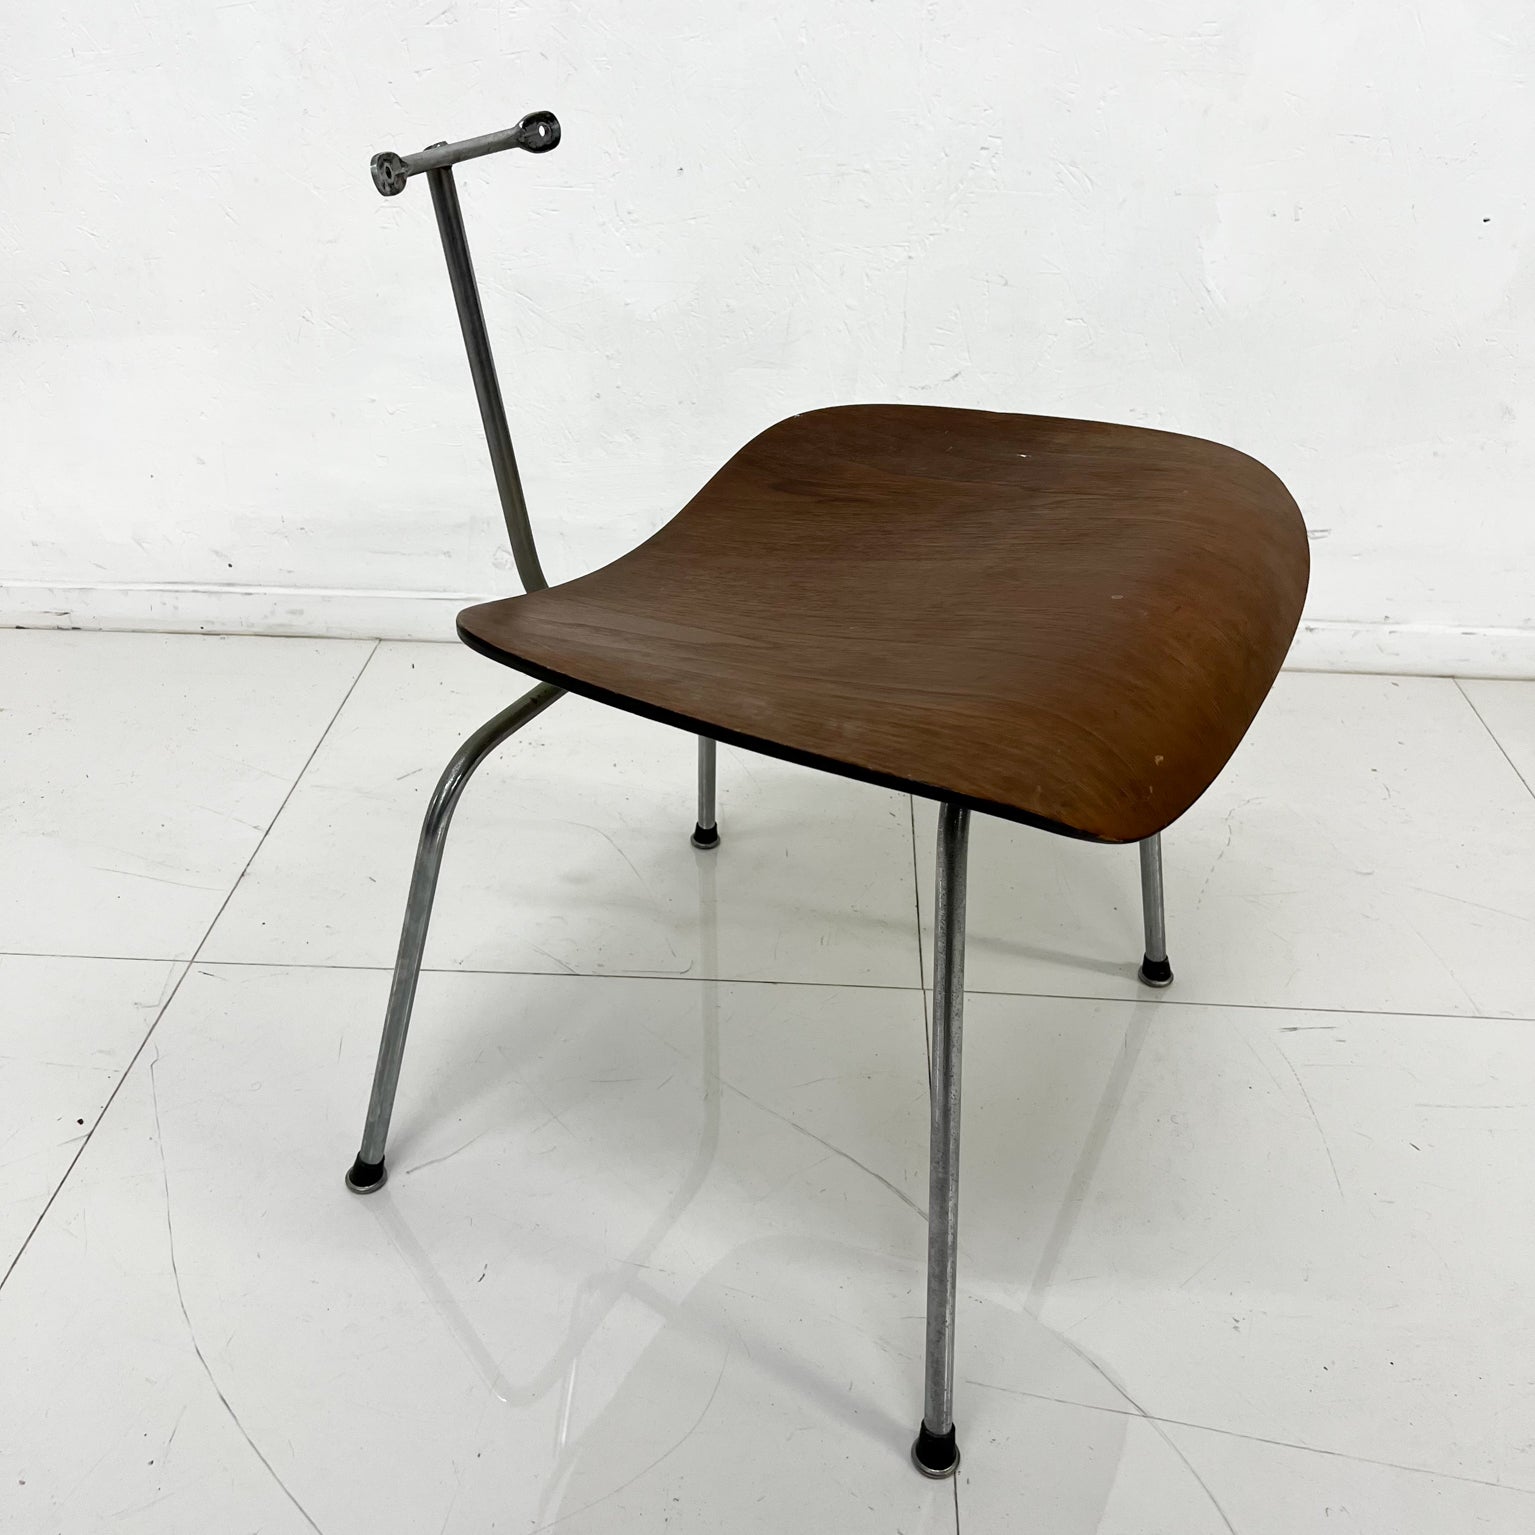 1950s eames for Herman Miller
Molded plywood chair
No label present.
Missing back rest
Measures: 19.25 w x 21.5 d x 25.5 tall, Seat 18 height
Preowned unrestored vintage condition
See all images provided.